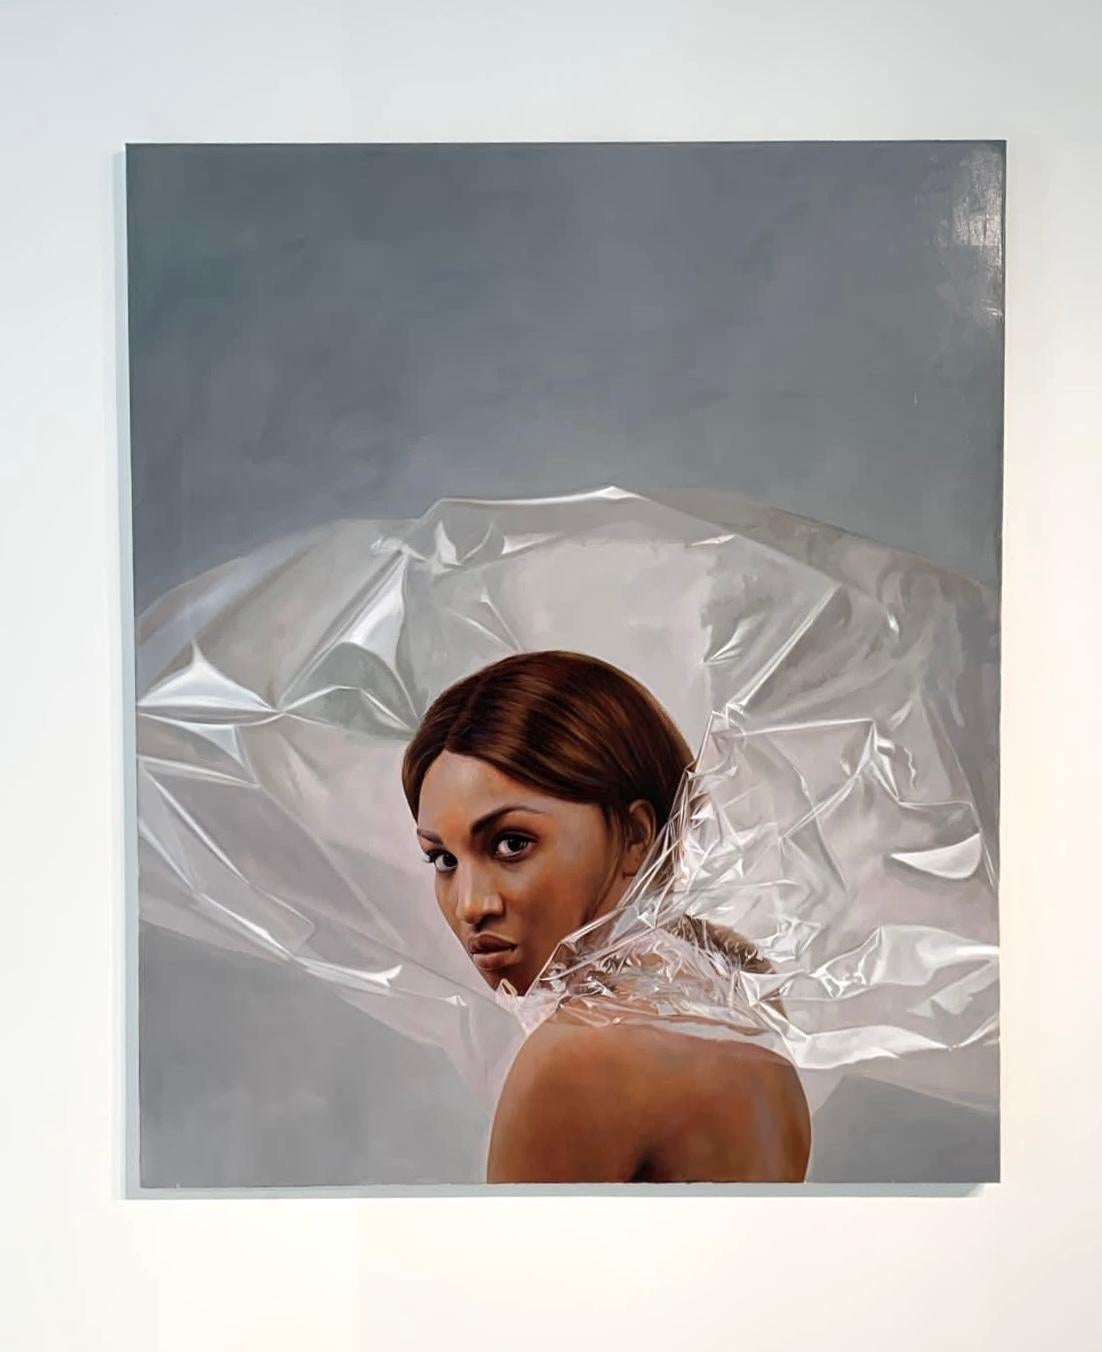 Slide Away - Photorealistic portrait painting by Mauro Maugliani